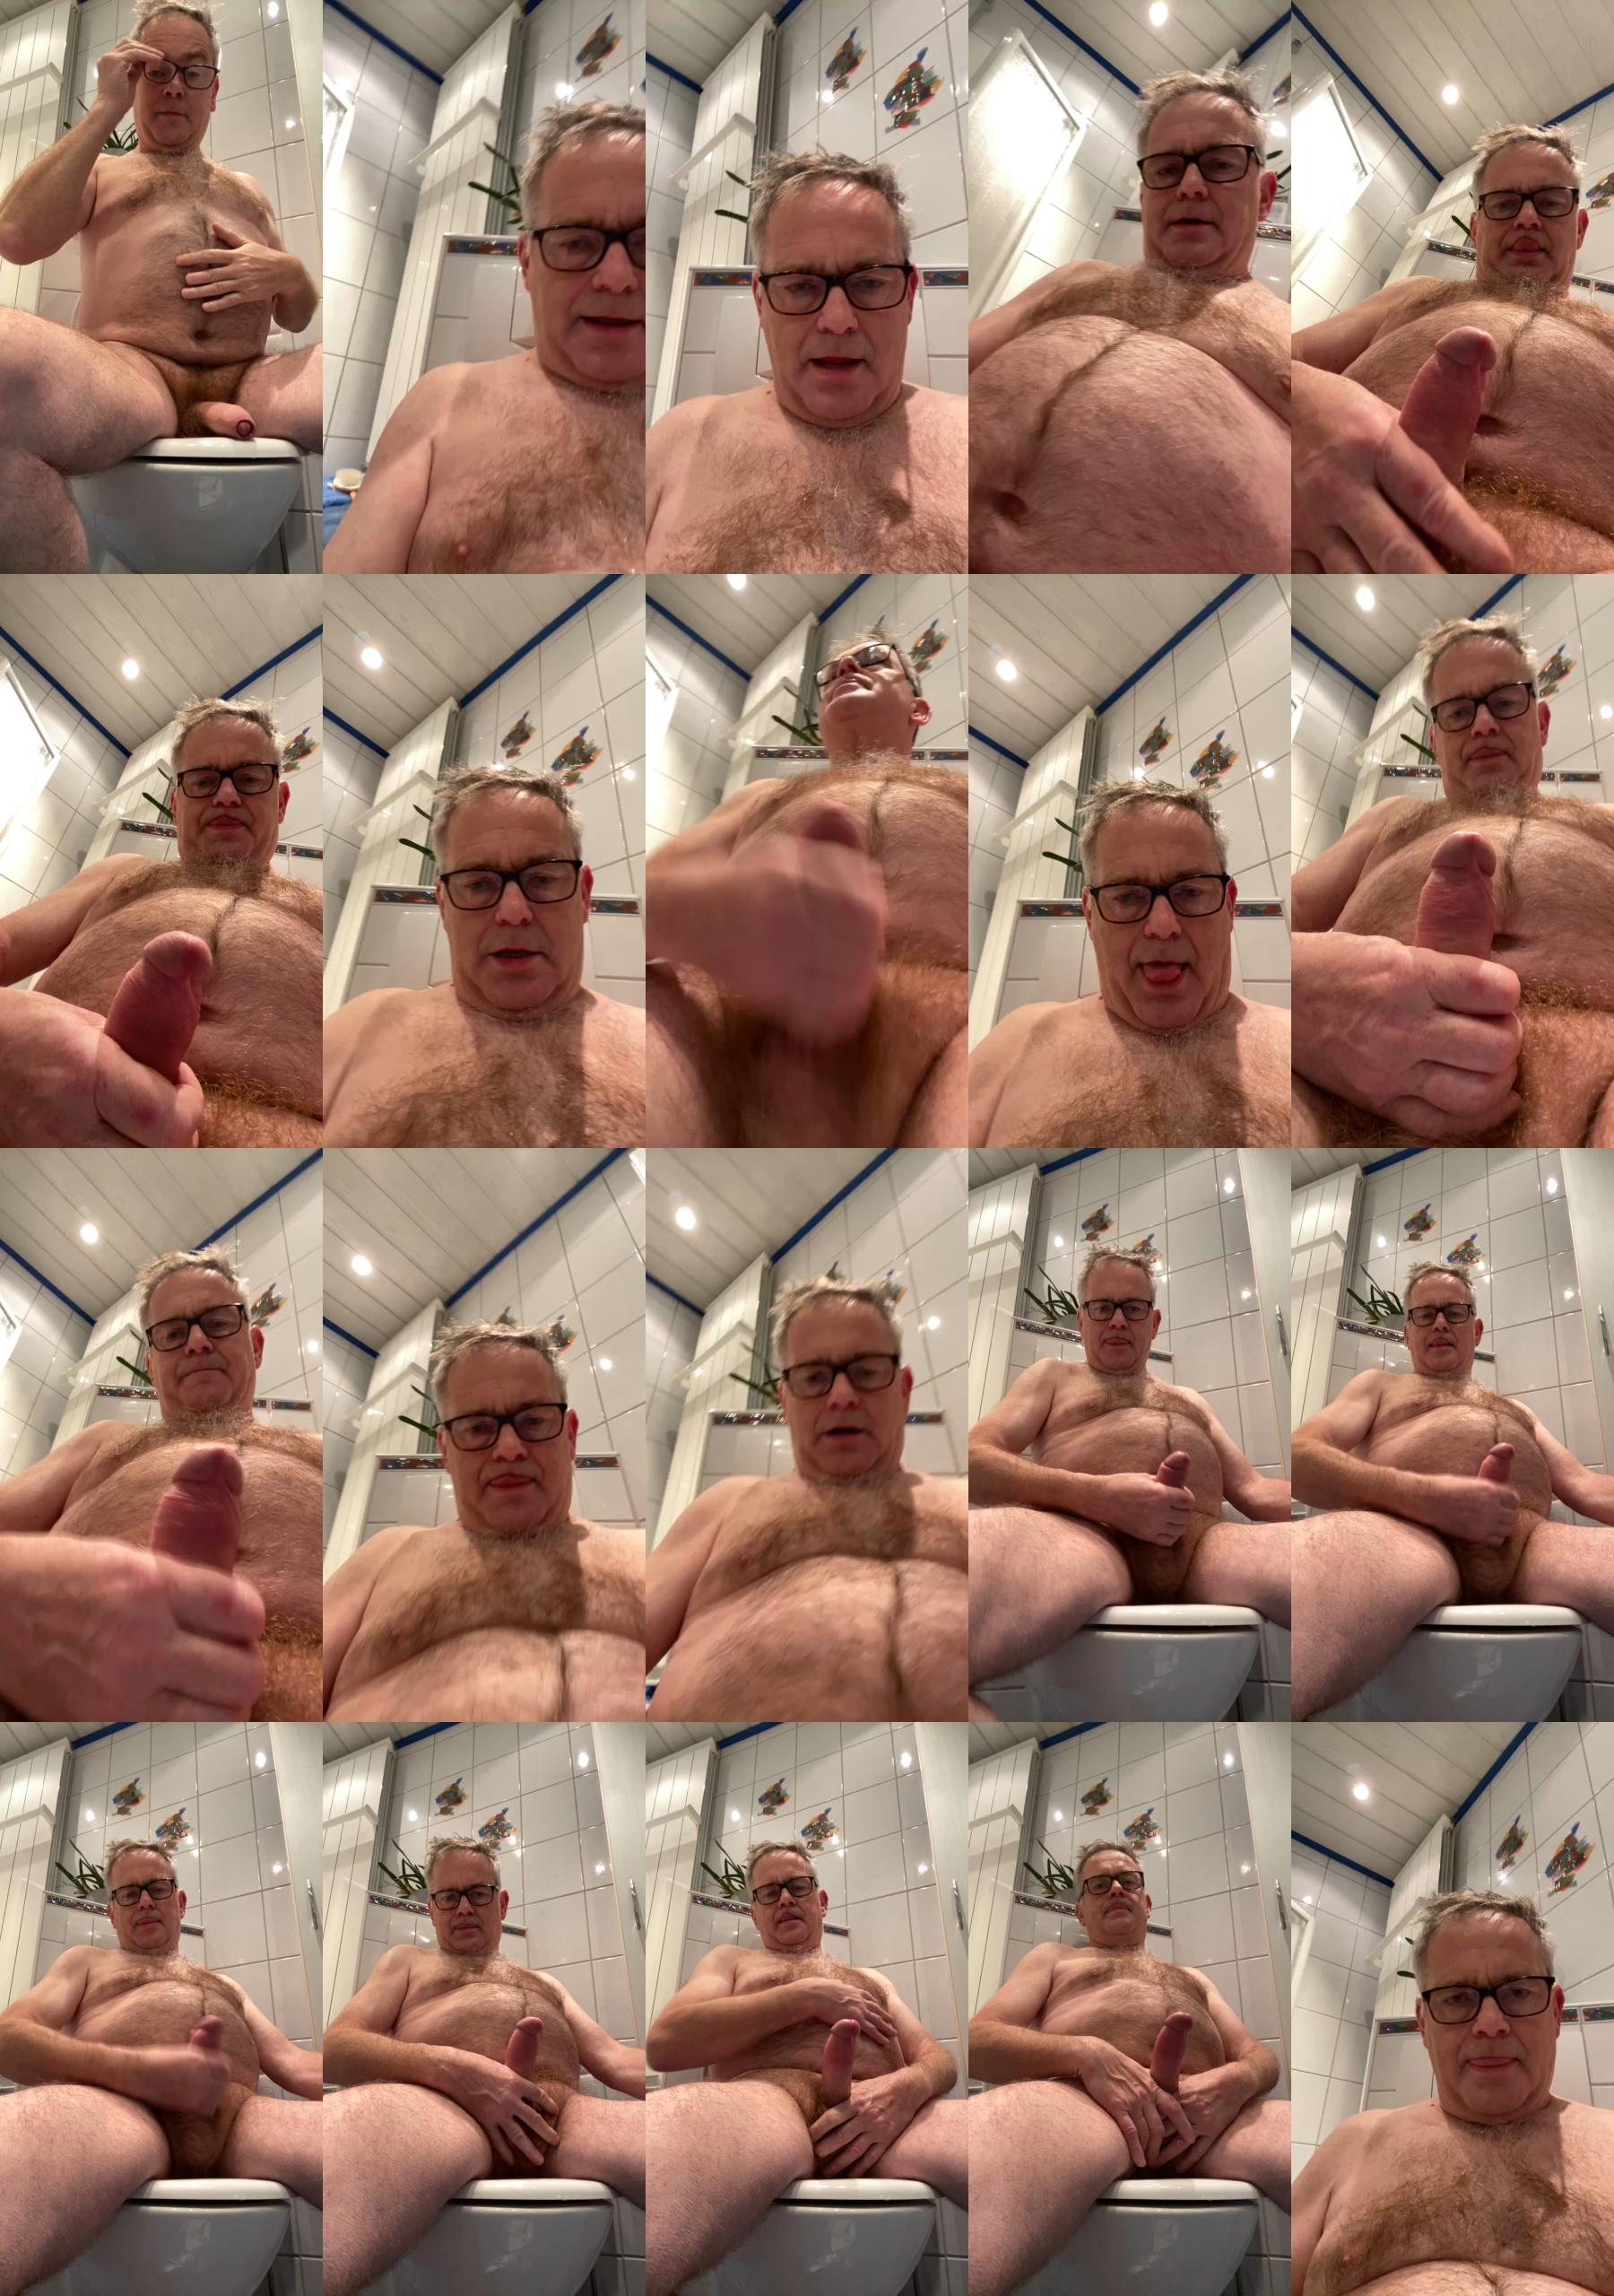 bernd_bawue  31-10-2021 Recorded Video Topless